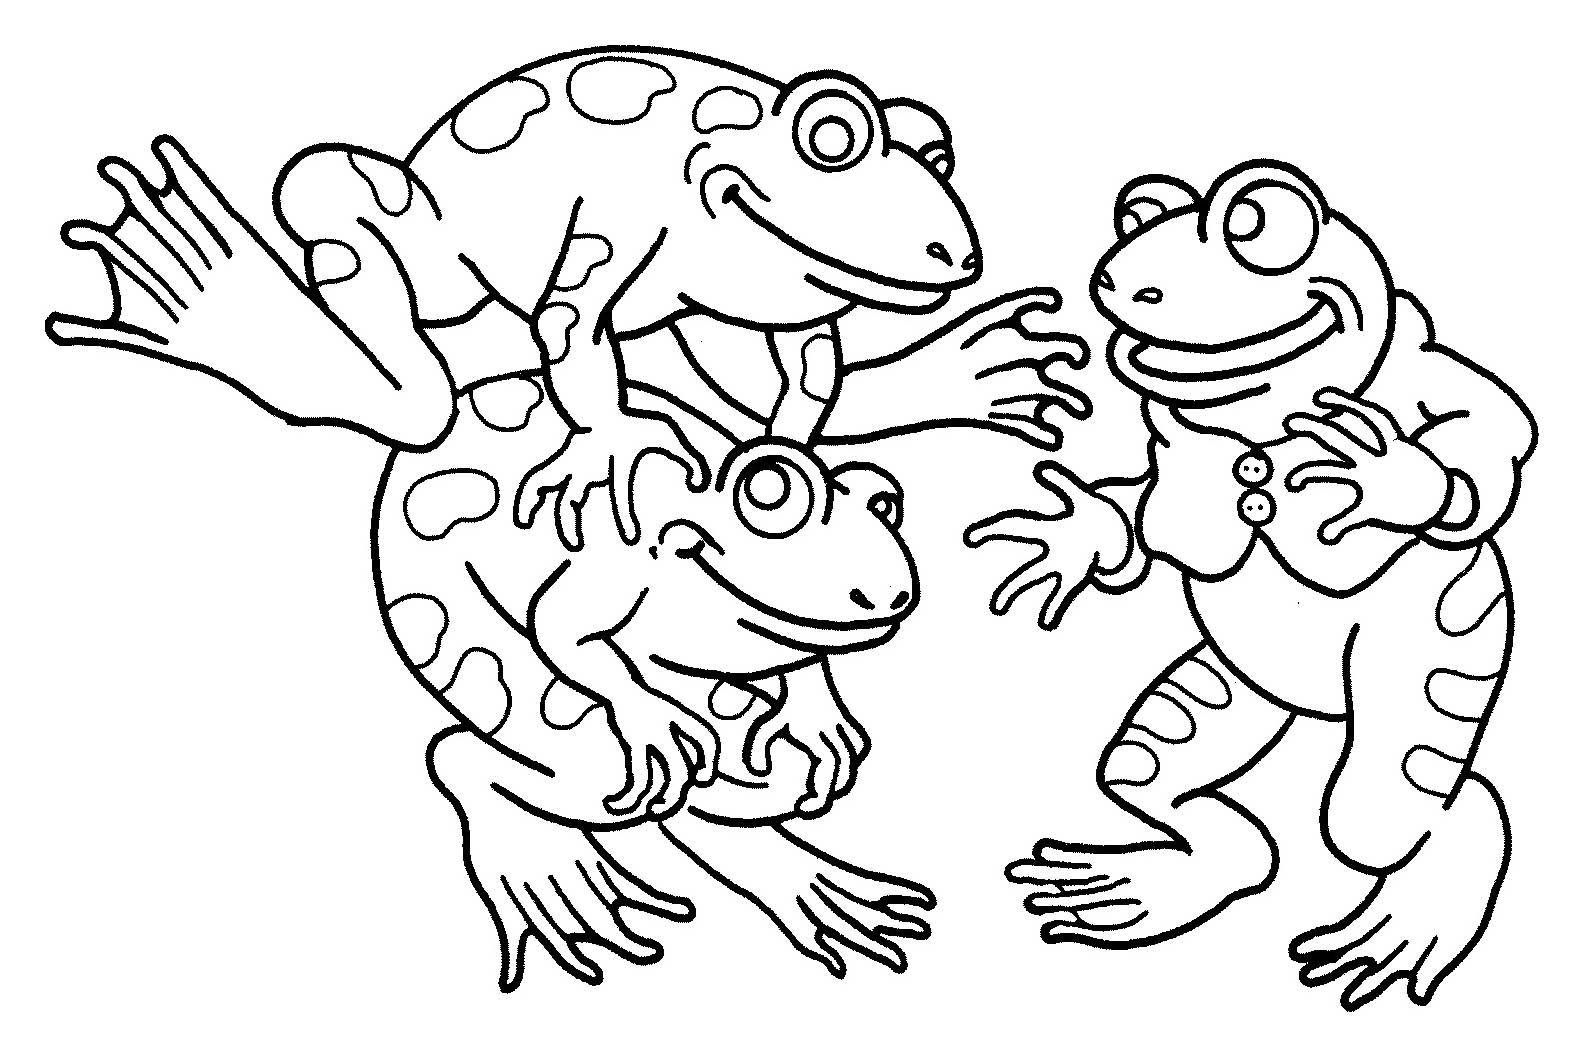 Frog coloring to download for free - Frogs Kids Coloring Pages